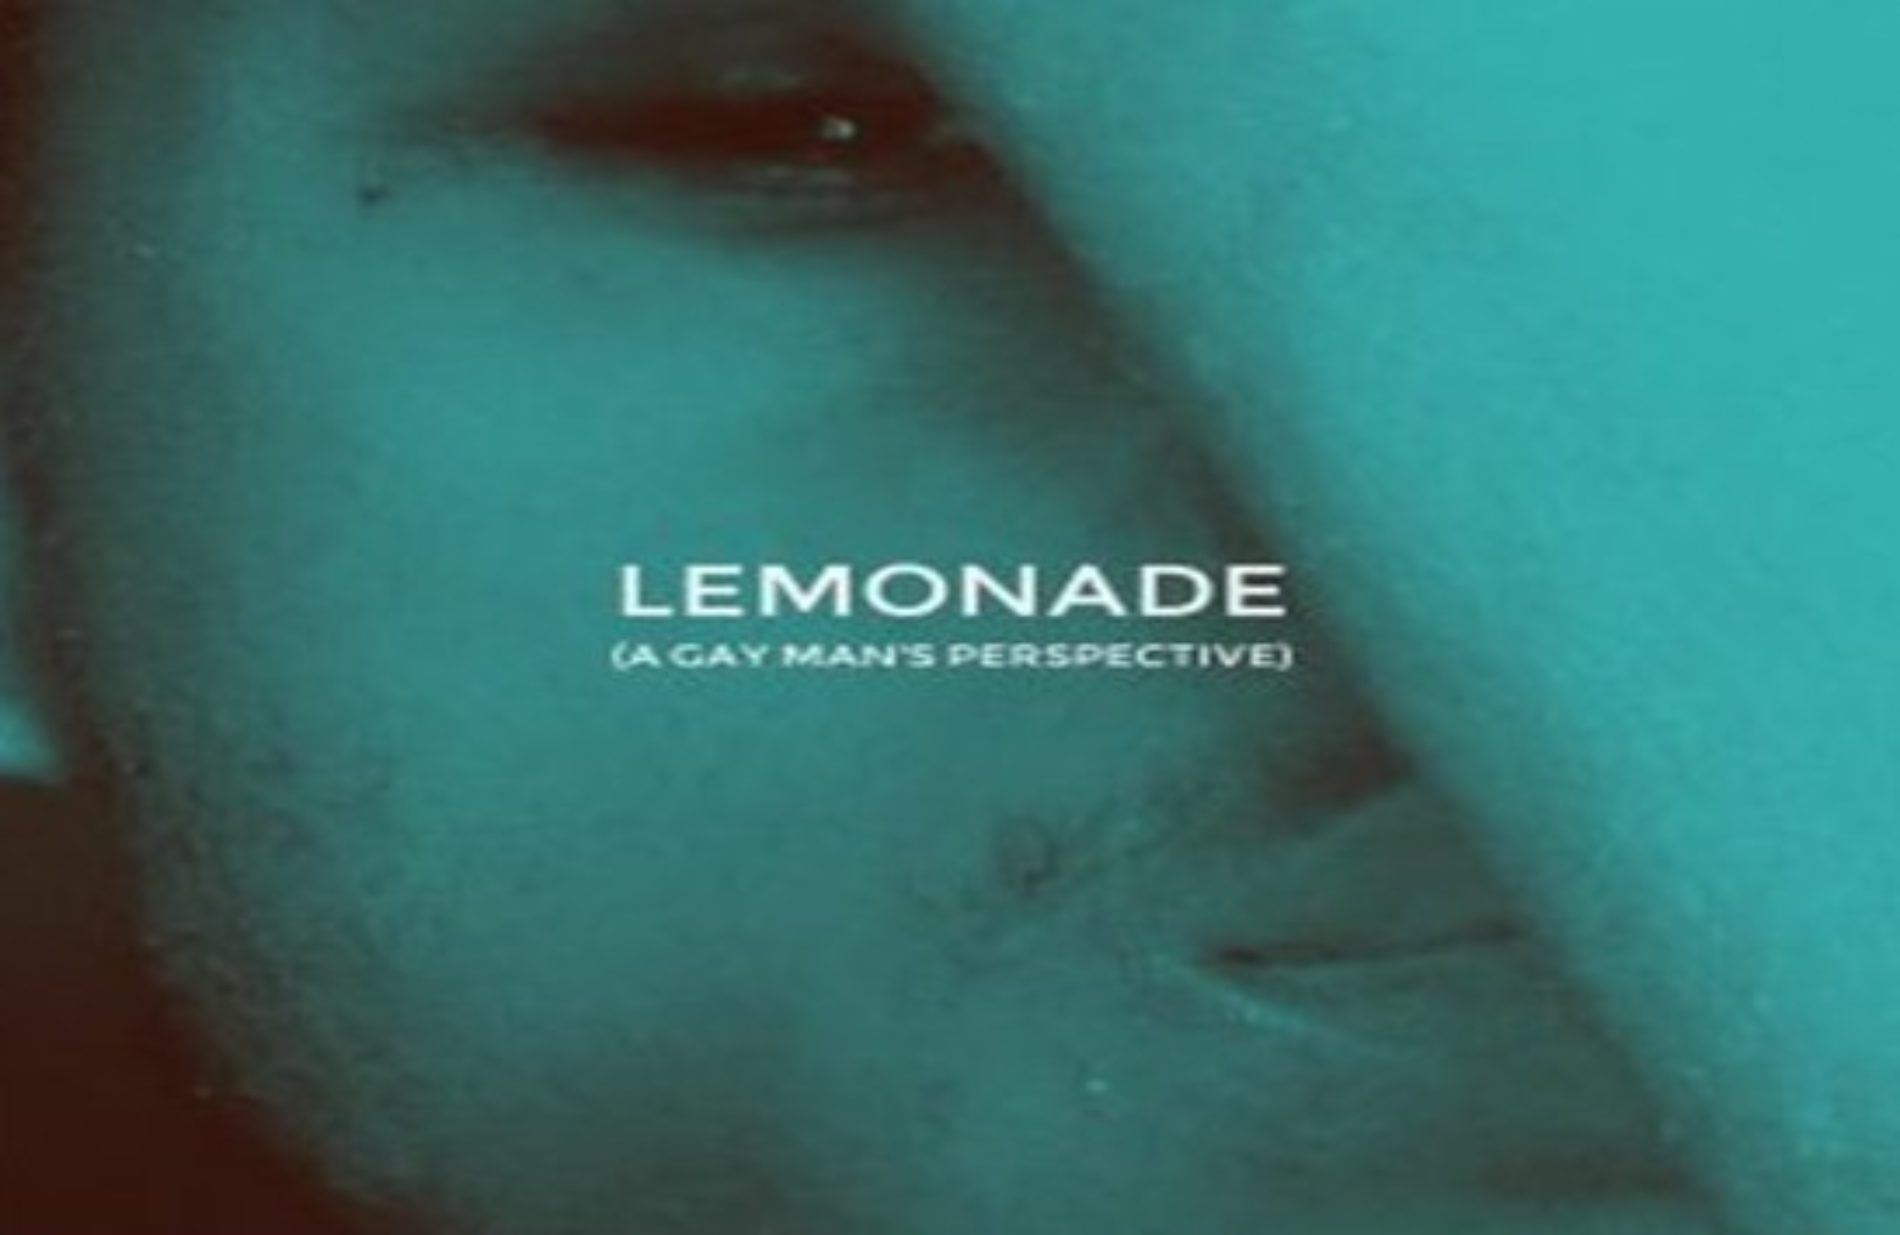 Lemonade: The Poetry (A Gay Man’s Perspective)